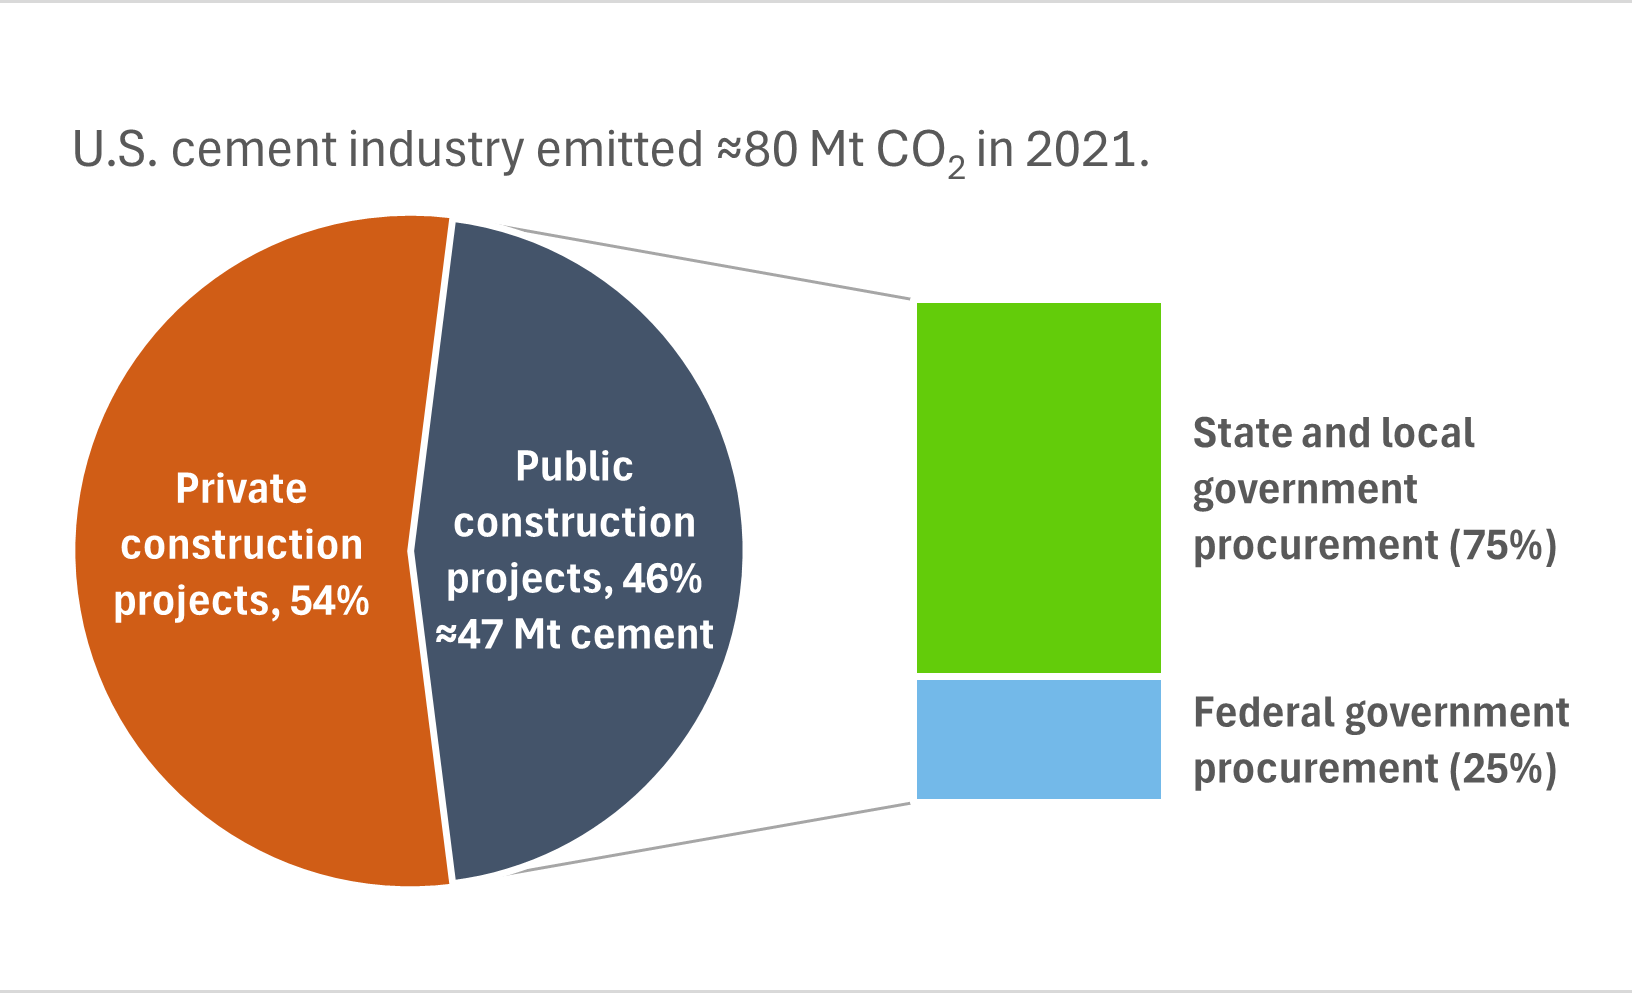 The U.S. cement industry emitted about 80 Mt of CO2 in 2021. Private construction projects accounted for 54% of the cement procured, while public construction projects accounted for the remaining 46% (about 47 Mt of cement). Of the public construction projects, state and local governments accounted for 75% of cement procurement and the federal government accounted for 25%.